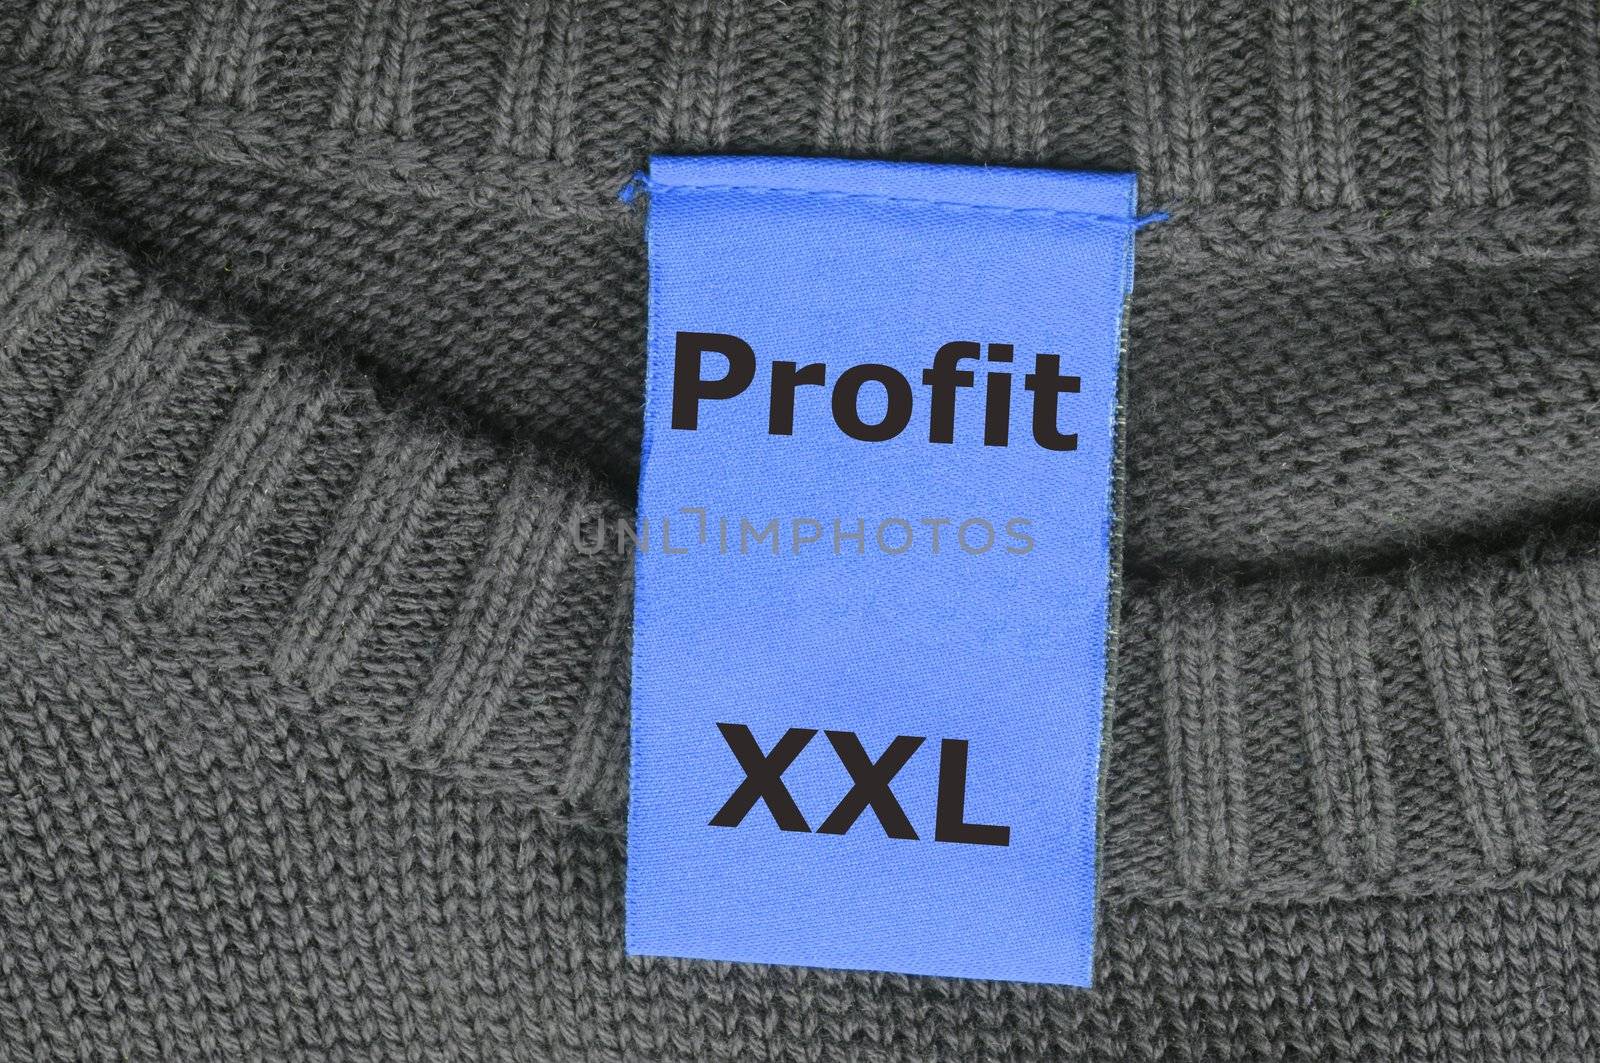 xxl profit with fashion label or tag showing financial success concept